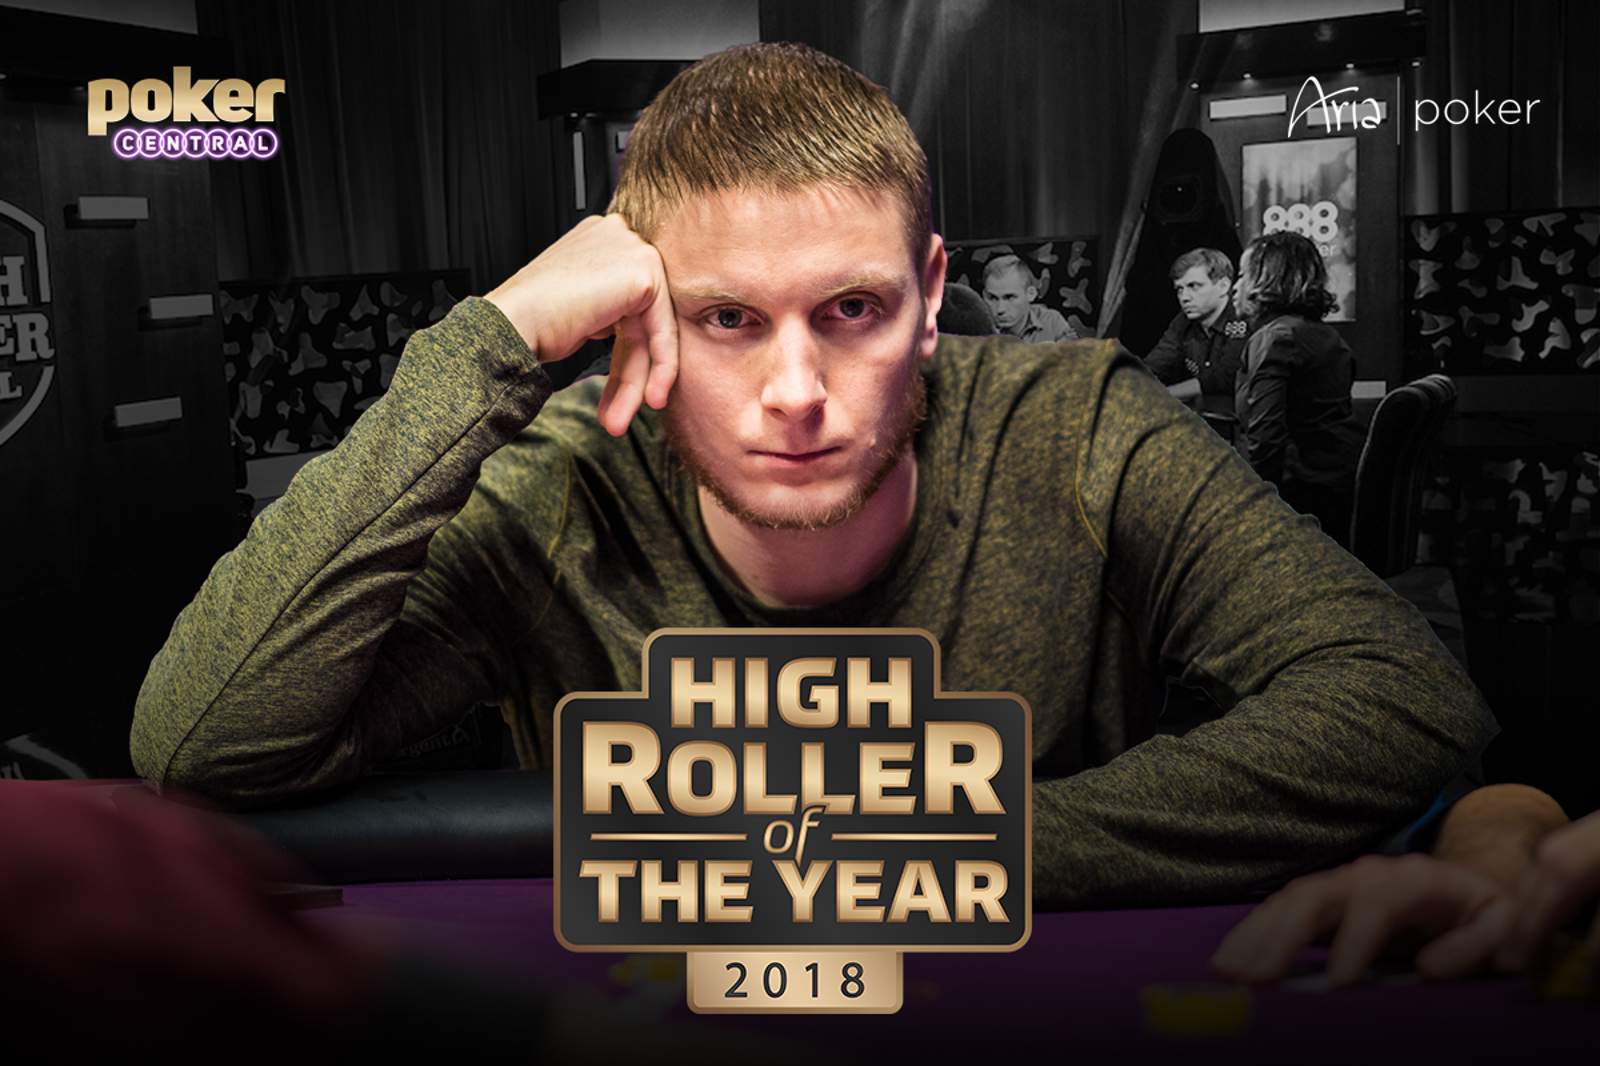 Sam Soverel Wins Inaugural High Roller of the Year Title